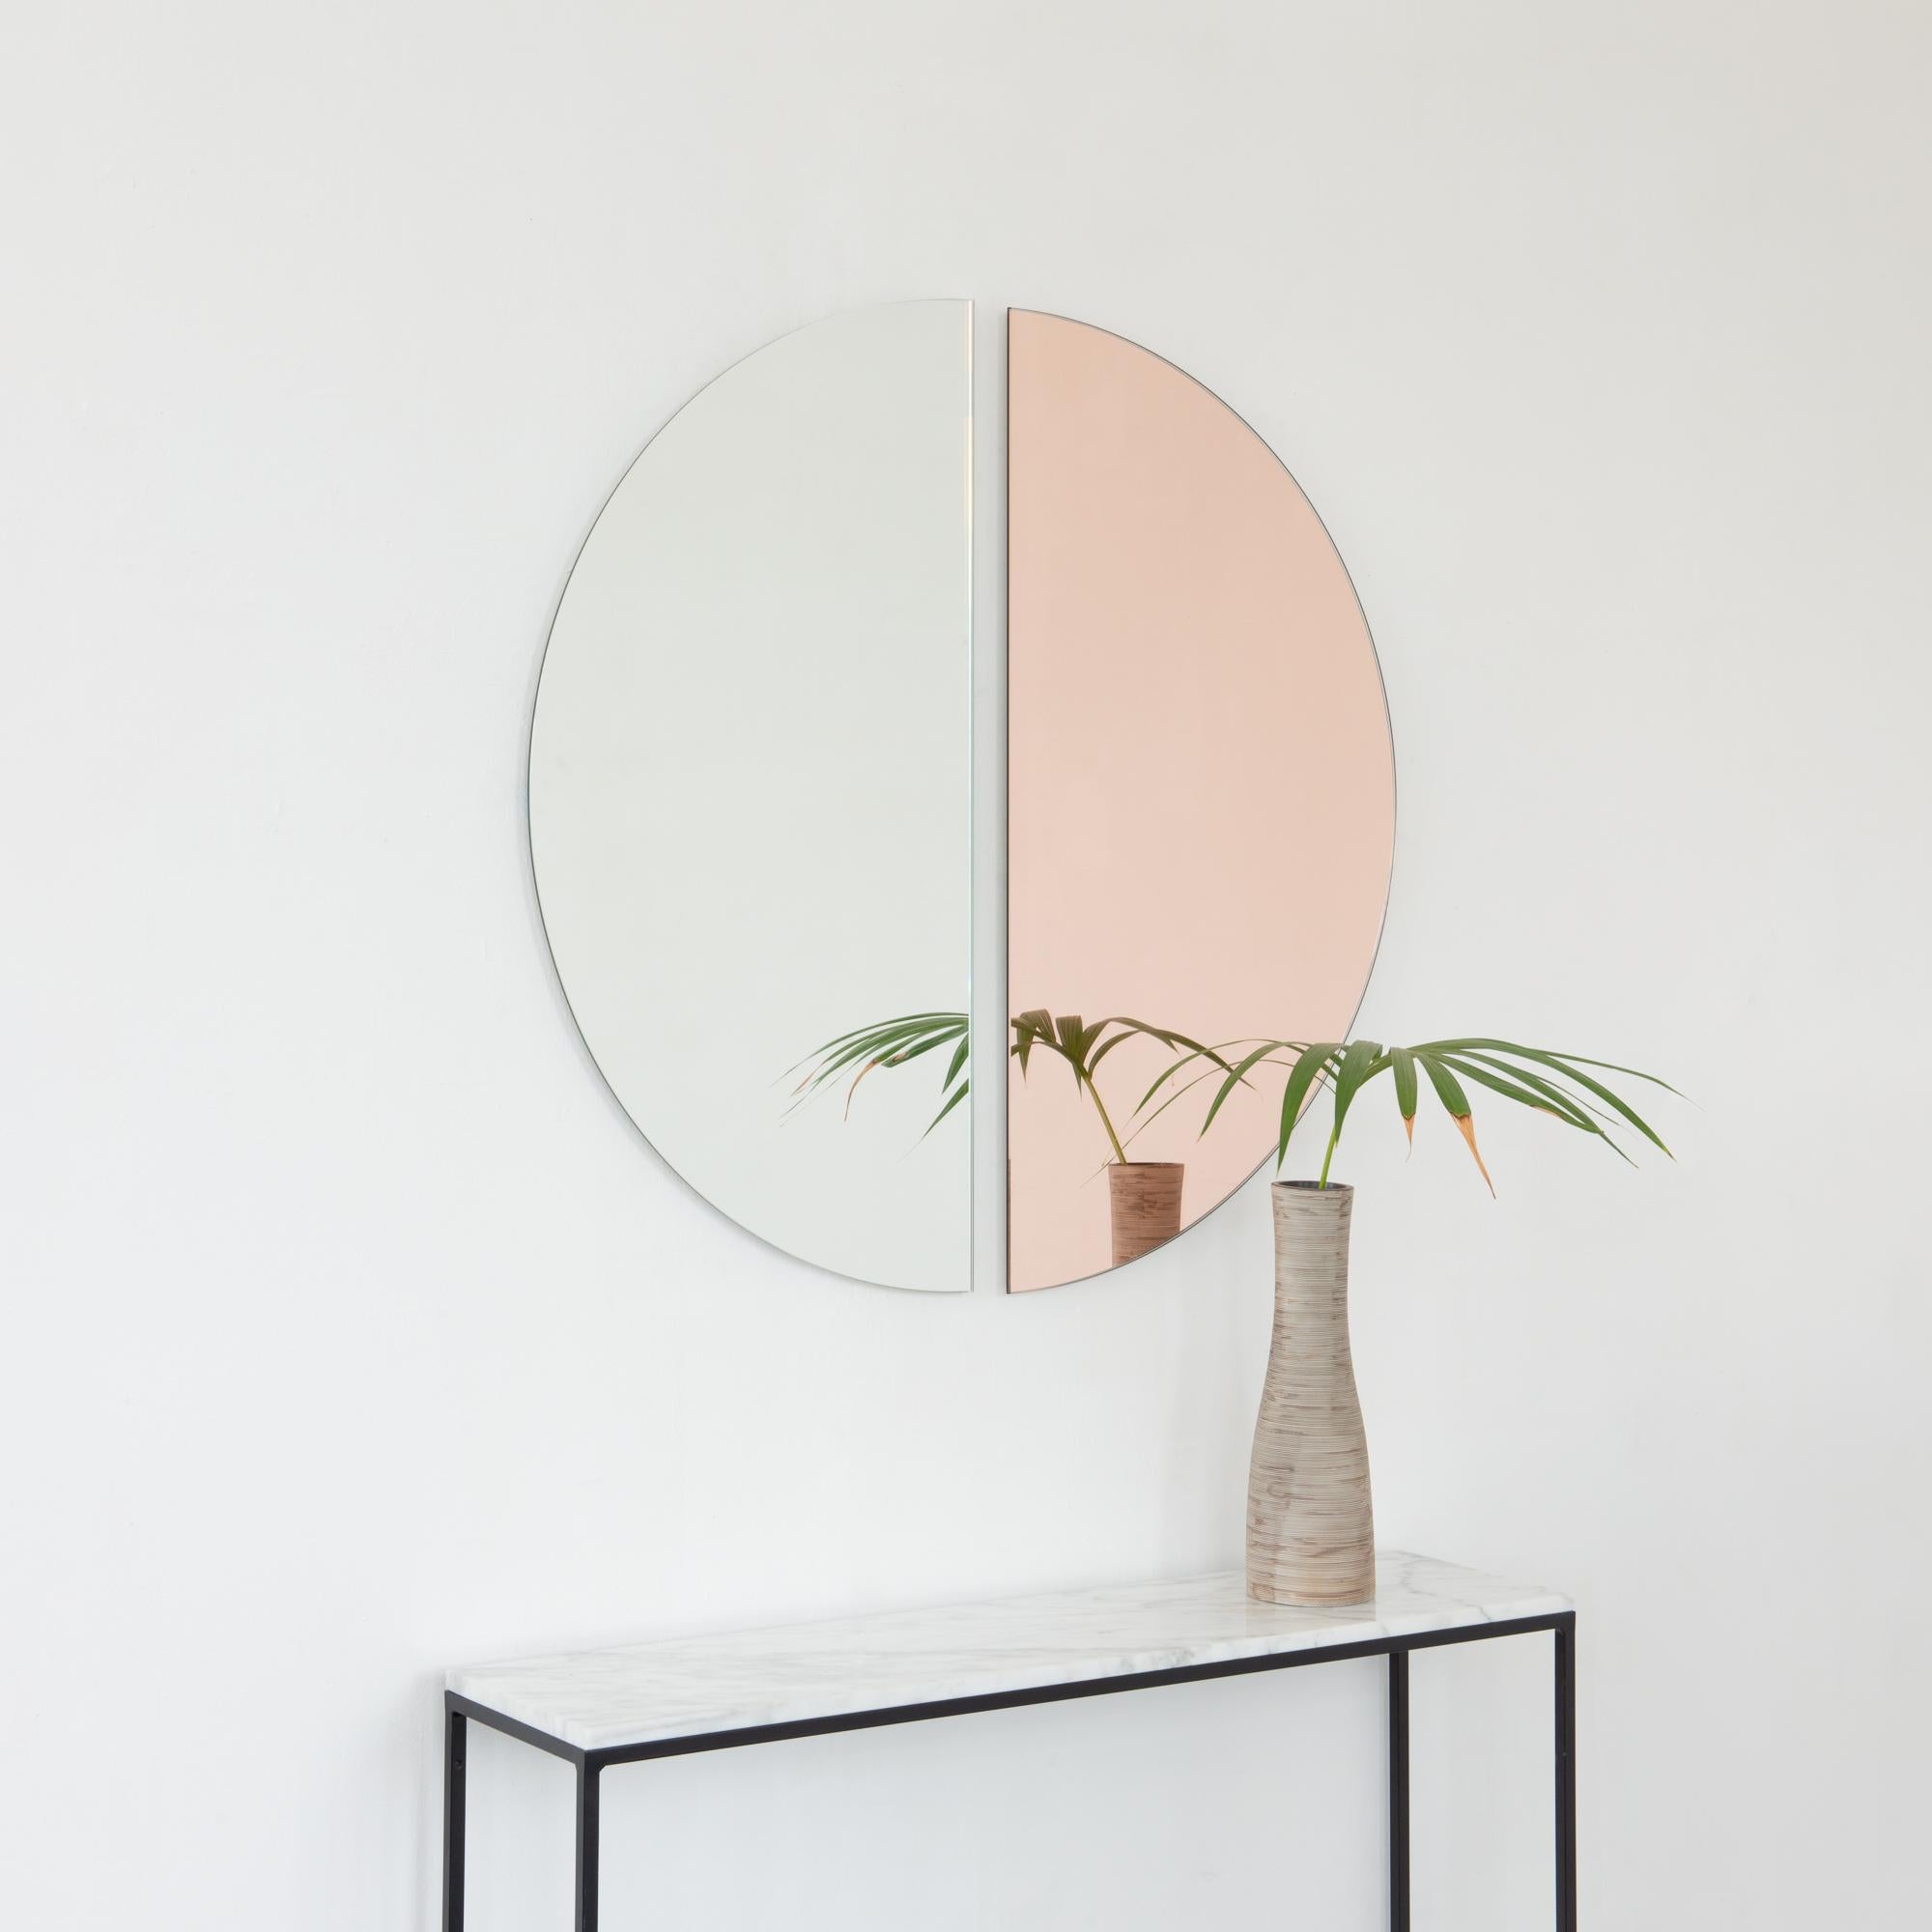 Set of two charming and minimalist rose gold (peach) and standard silver half-moon frameless mirrors with a floating effect. Fitted with a quality and ingenious hanging system for a flexible installation in 4 different directions. Designed and made